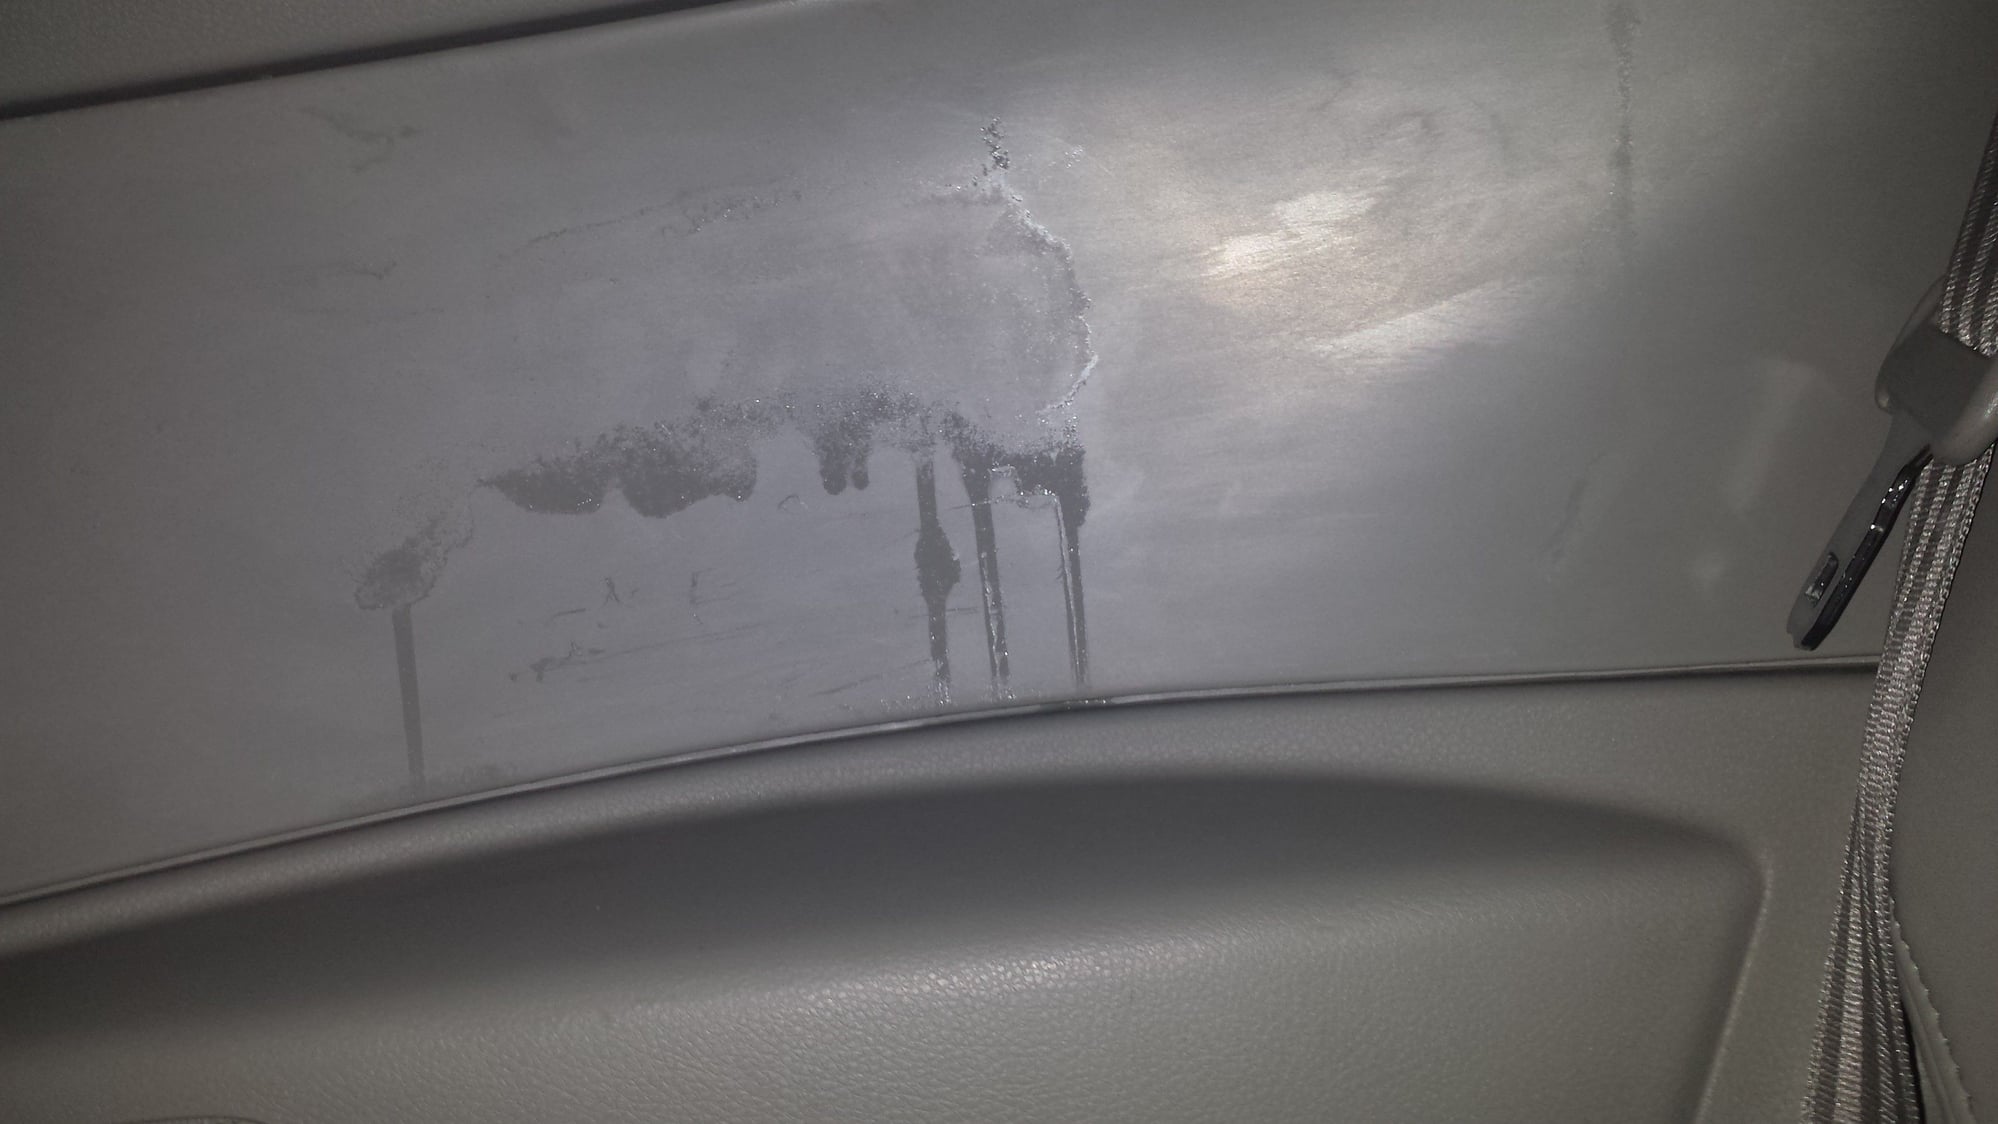 Goo-Gone Ate My Paint.. - G35Driver - Infiniti G35 & G37 Forum Discussion